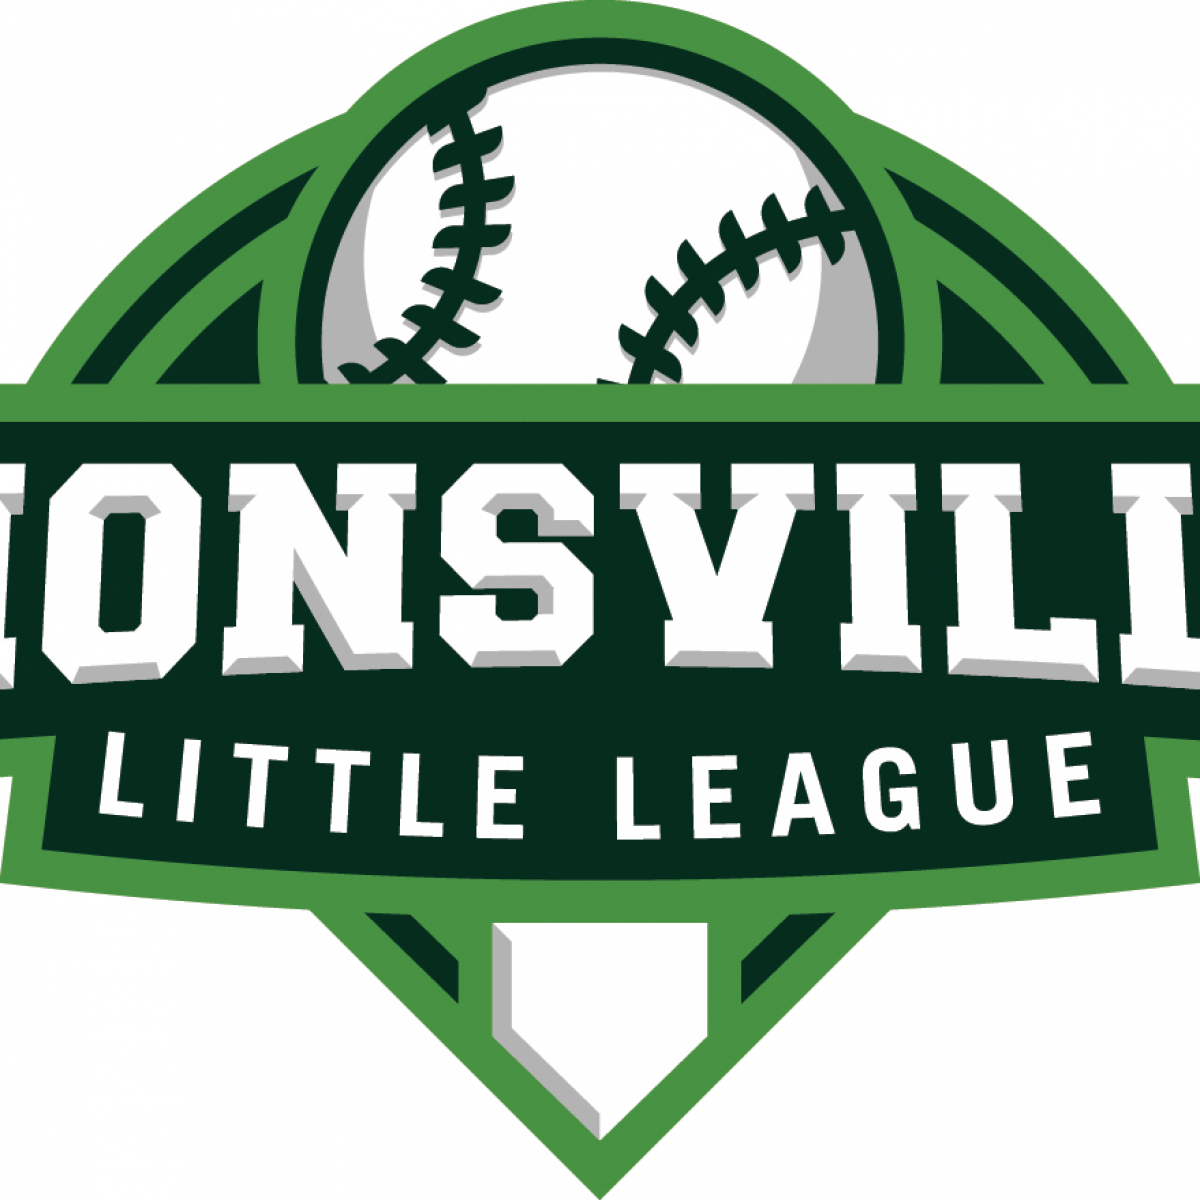 volunteers-needed-for-zll-board-positions-zionsville-little-league